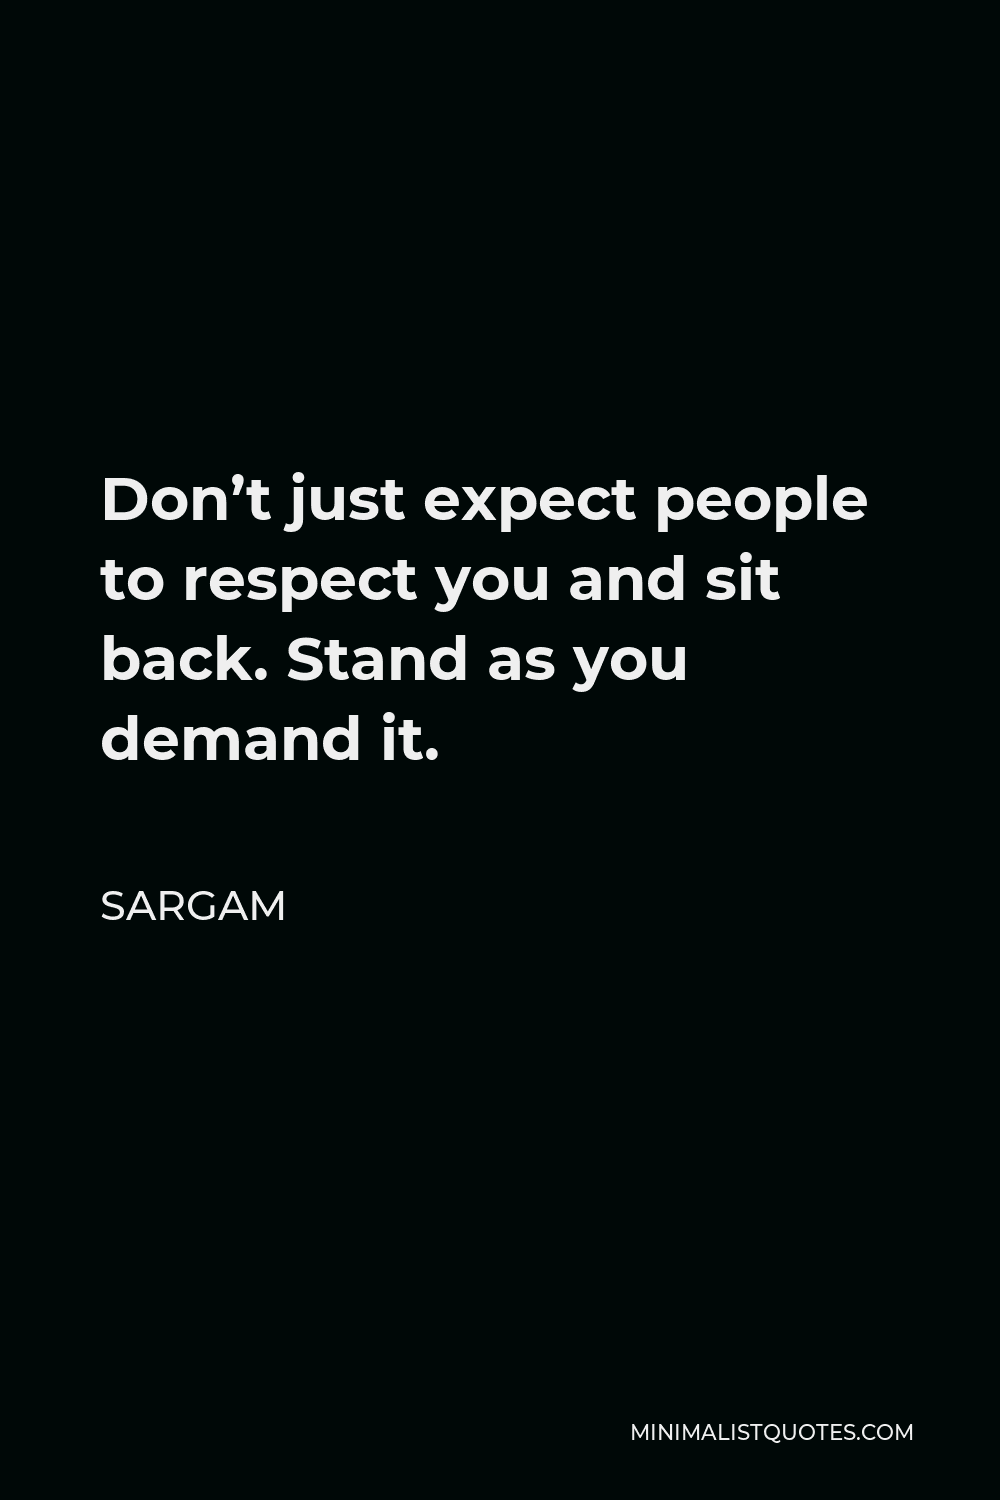 Sargam Quote - Don’t just expect people to respect you and sit back. Stand as you demand it.